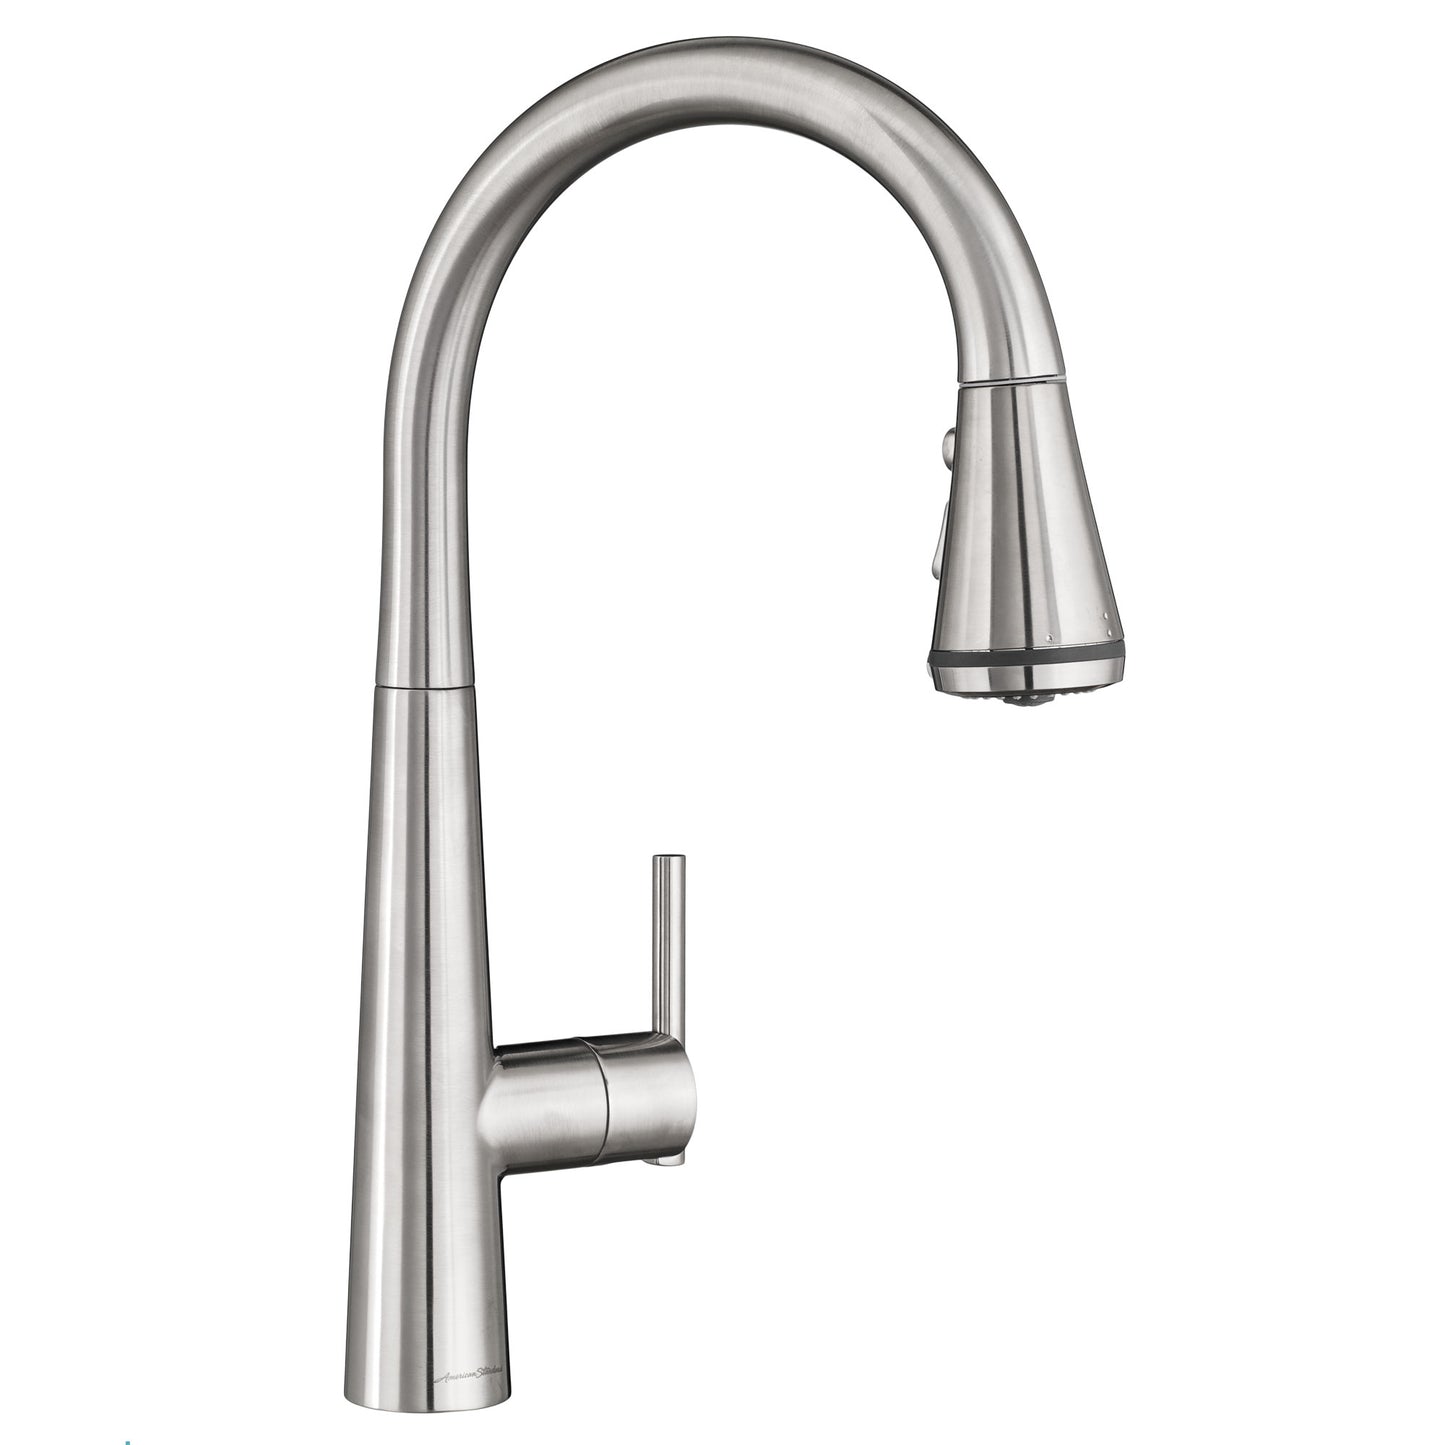 AMERICAN-STANDARD 4932300.075, Edgewater Single-Handle Pull-Down Multi Spray Kitchen Faucet 1.8 gpm/6.8 L/min in Stainless Stl